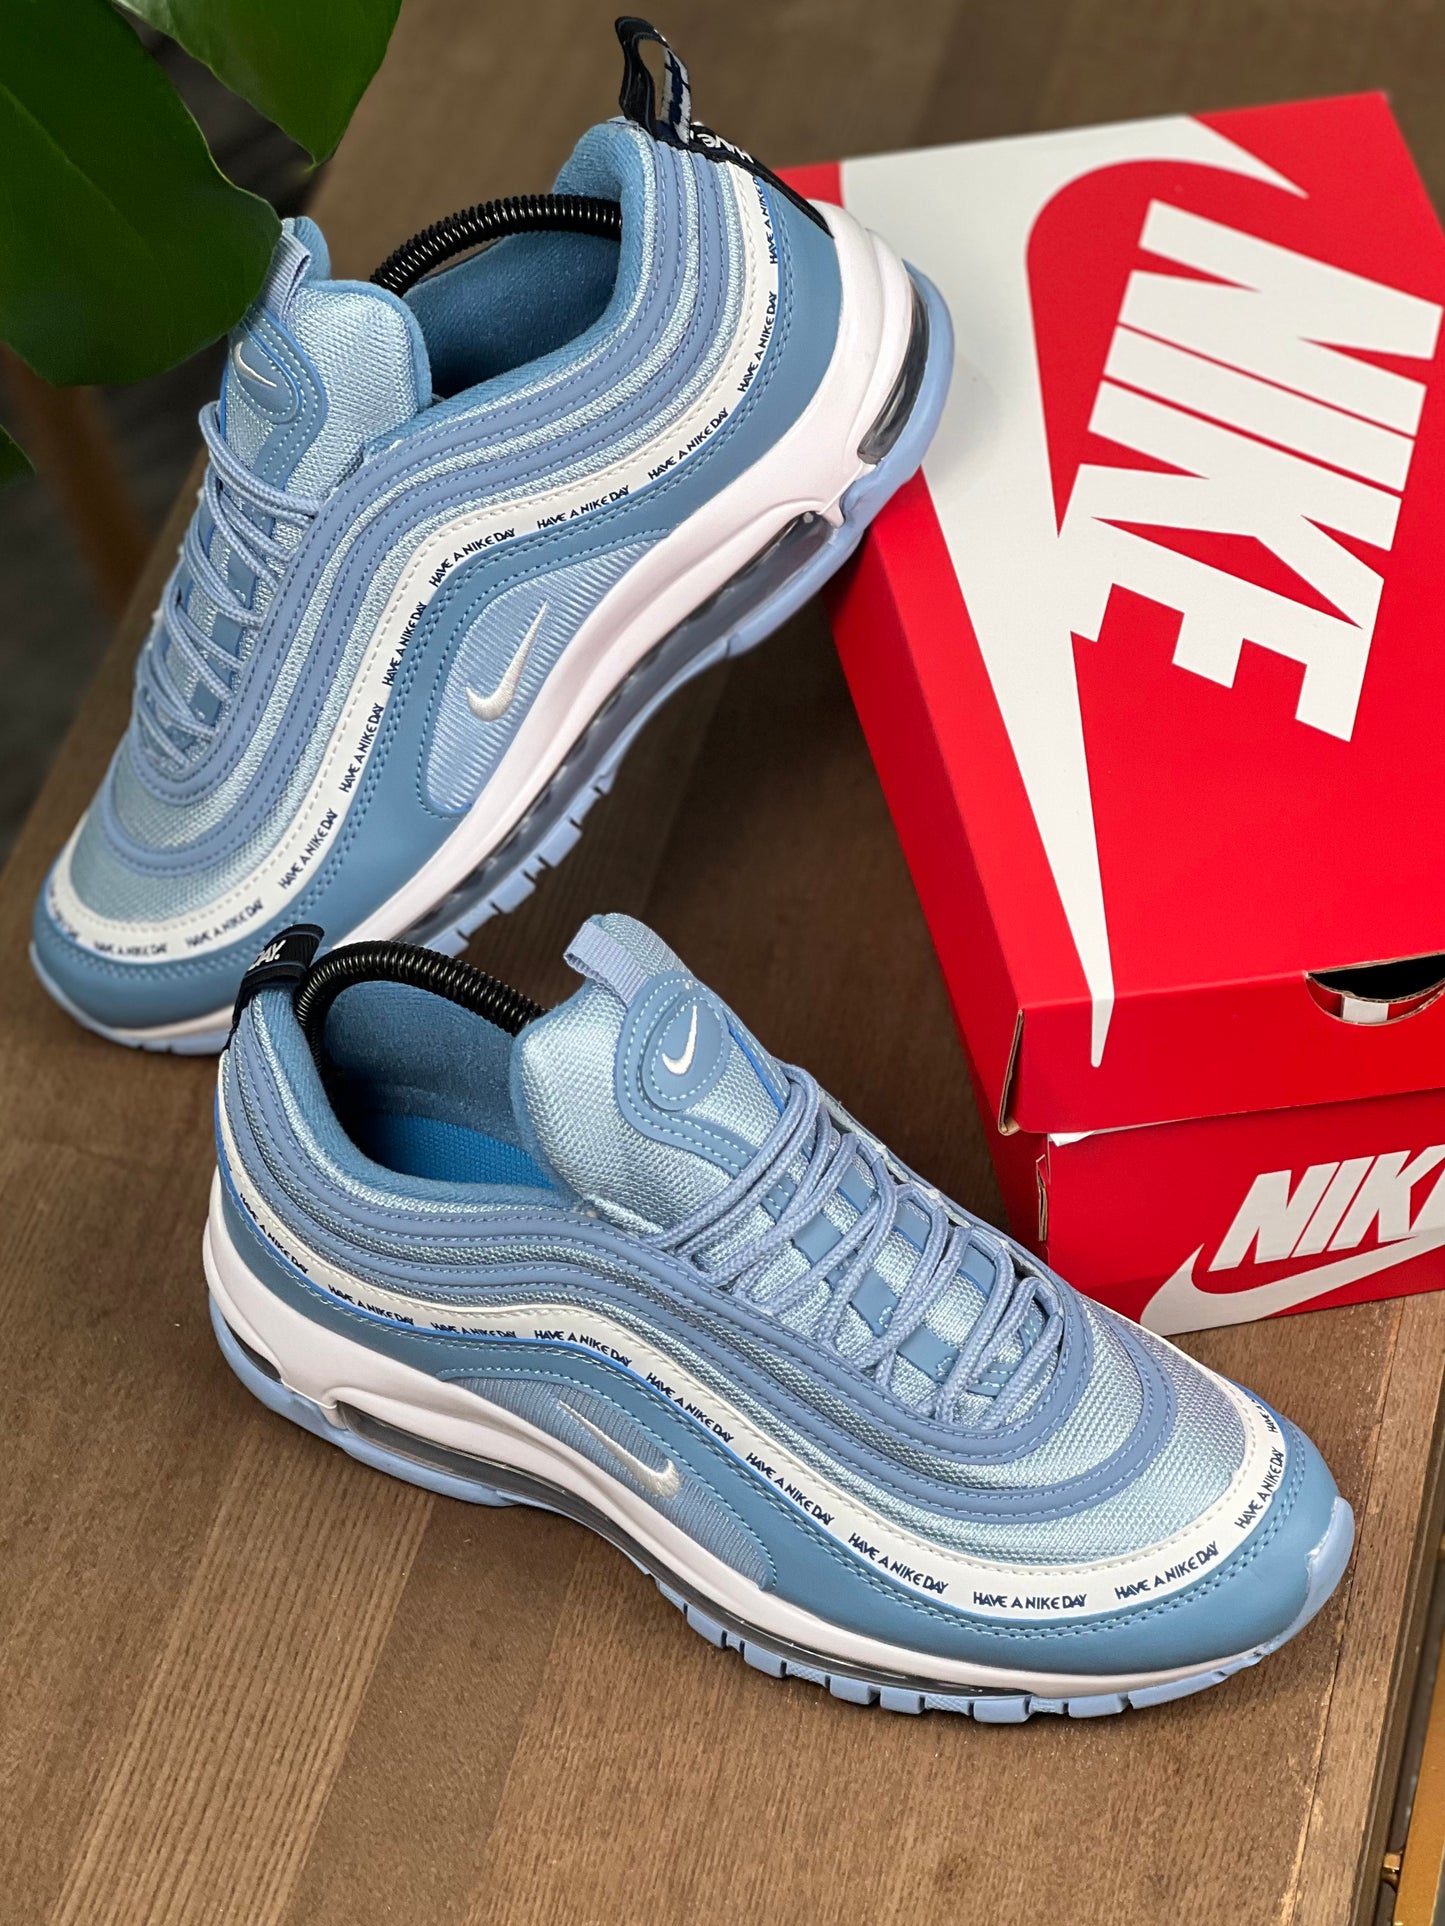 Nike Air Max 97 “Have a Nike Day”